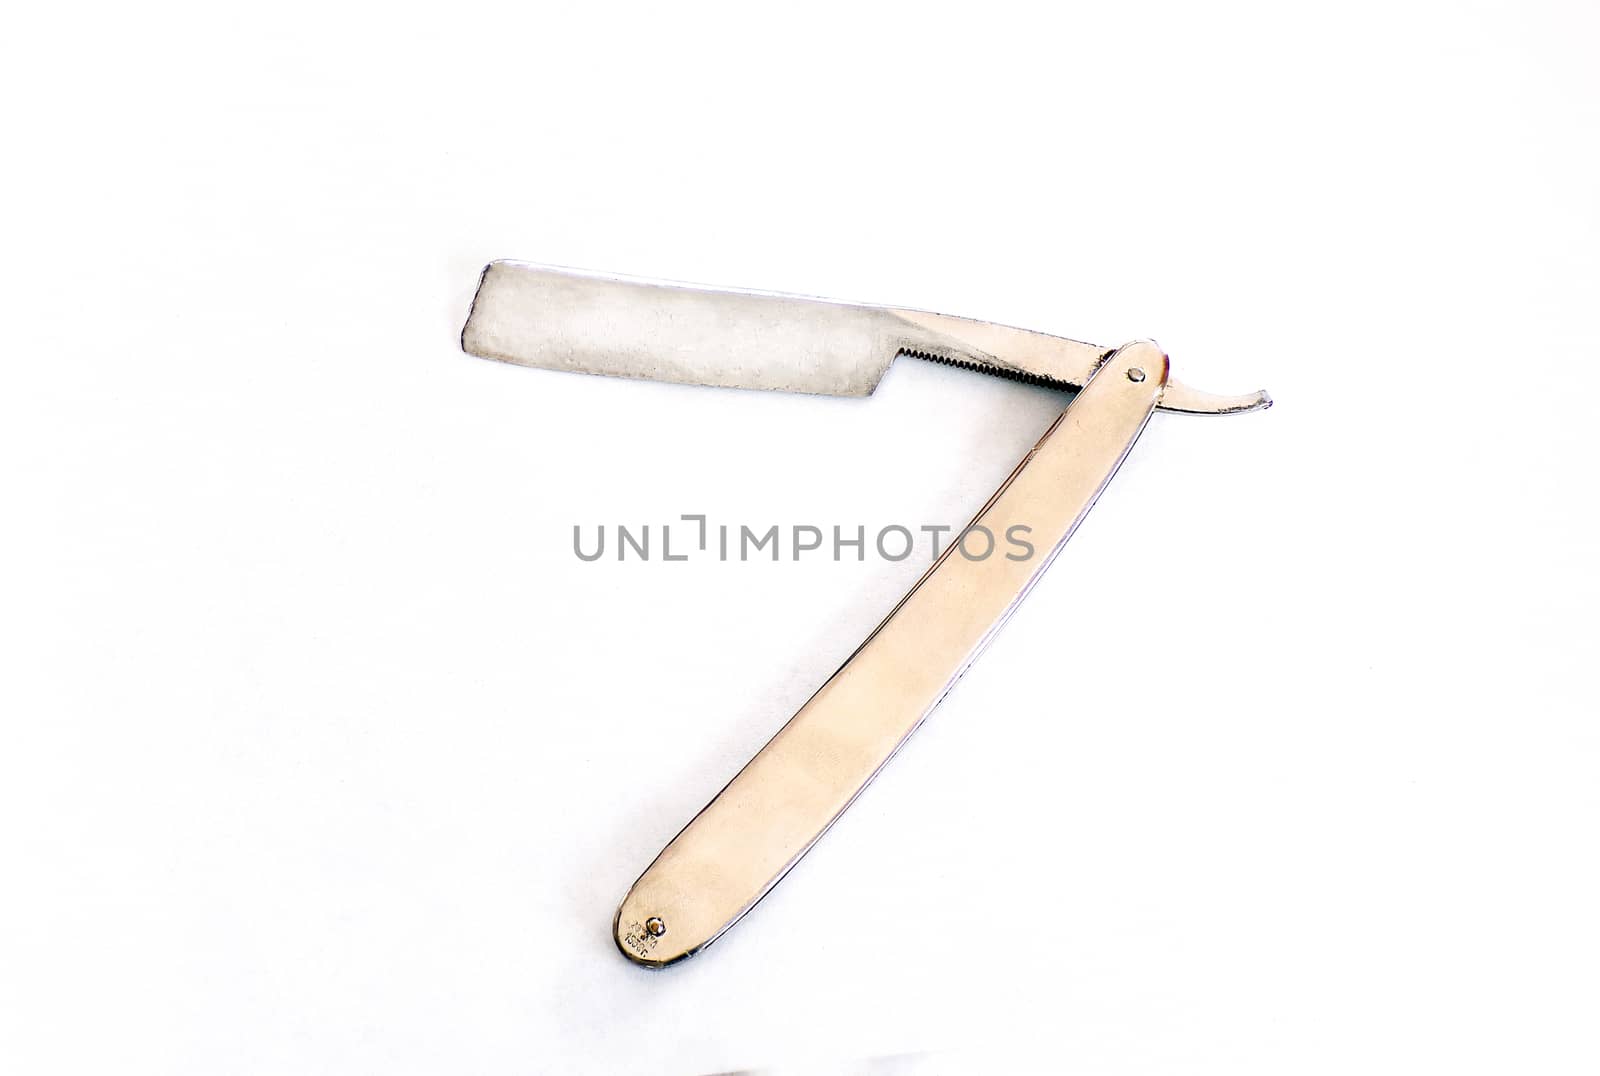 A manual or dangerous razor is isolated on a white background. Polished razor with chrome. Razor in retro style.